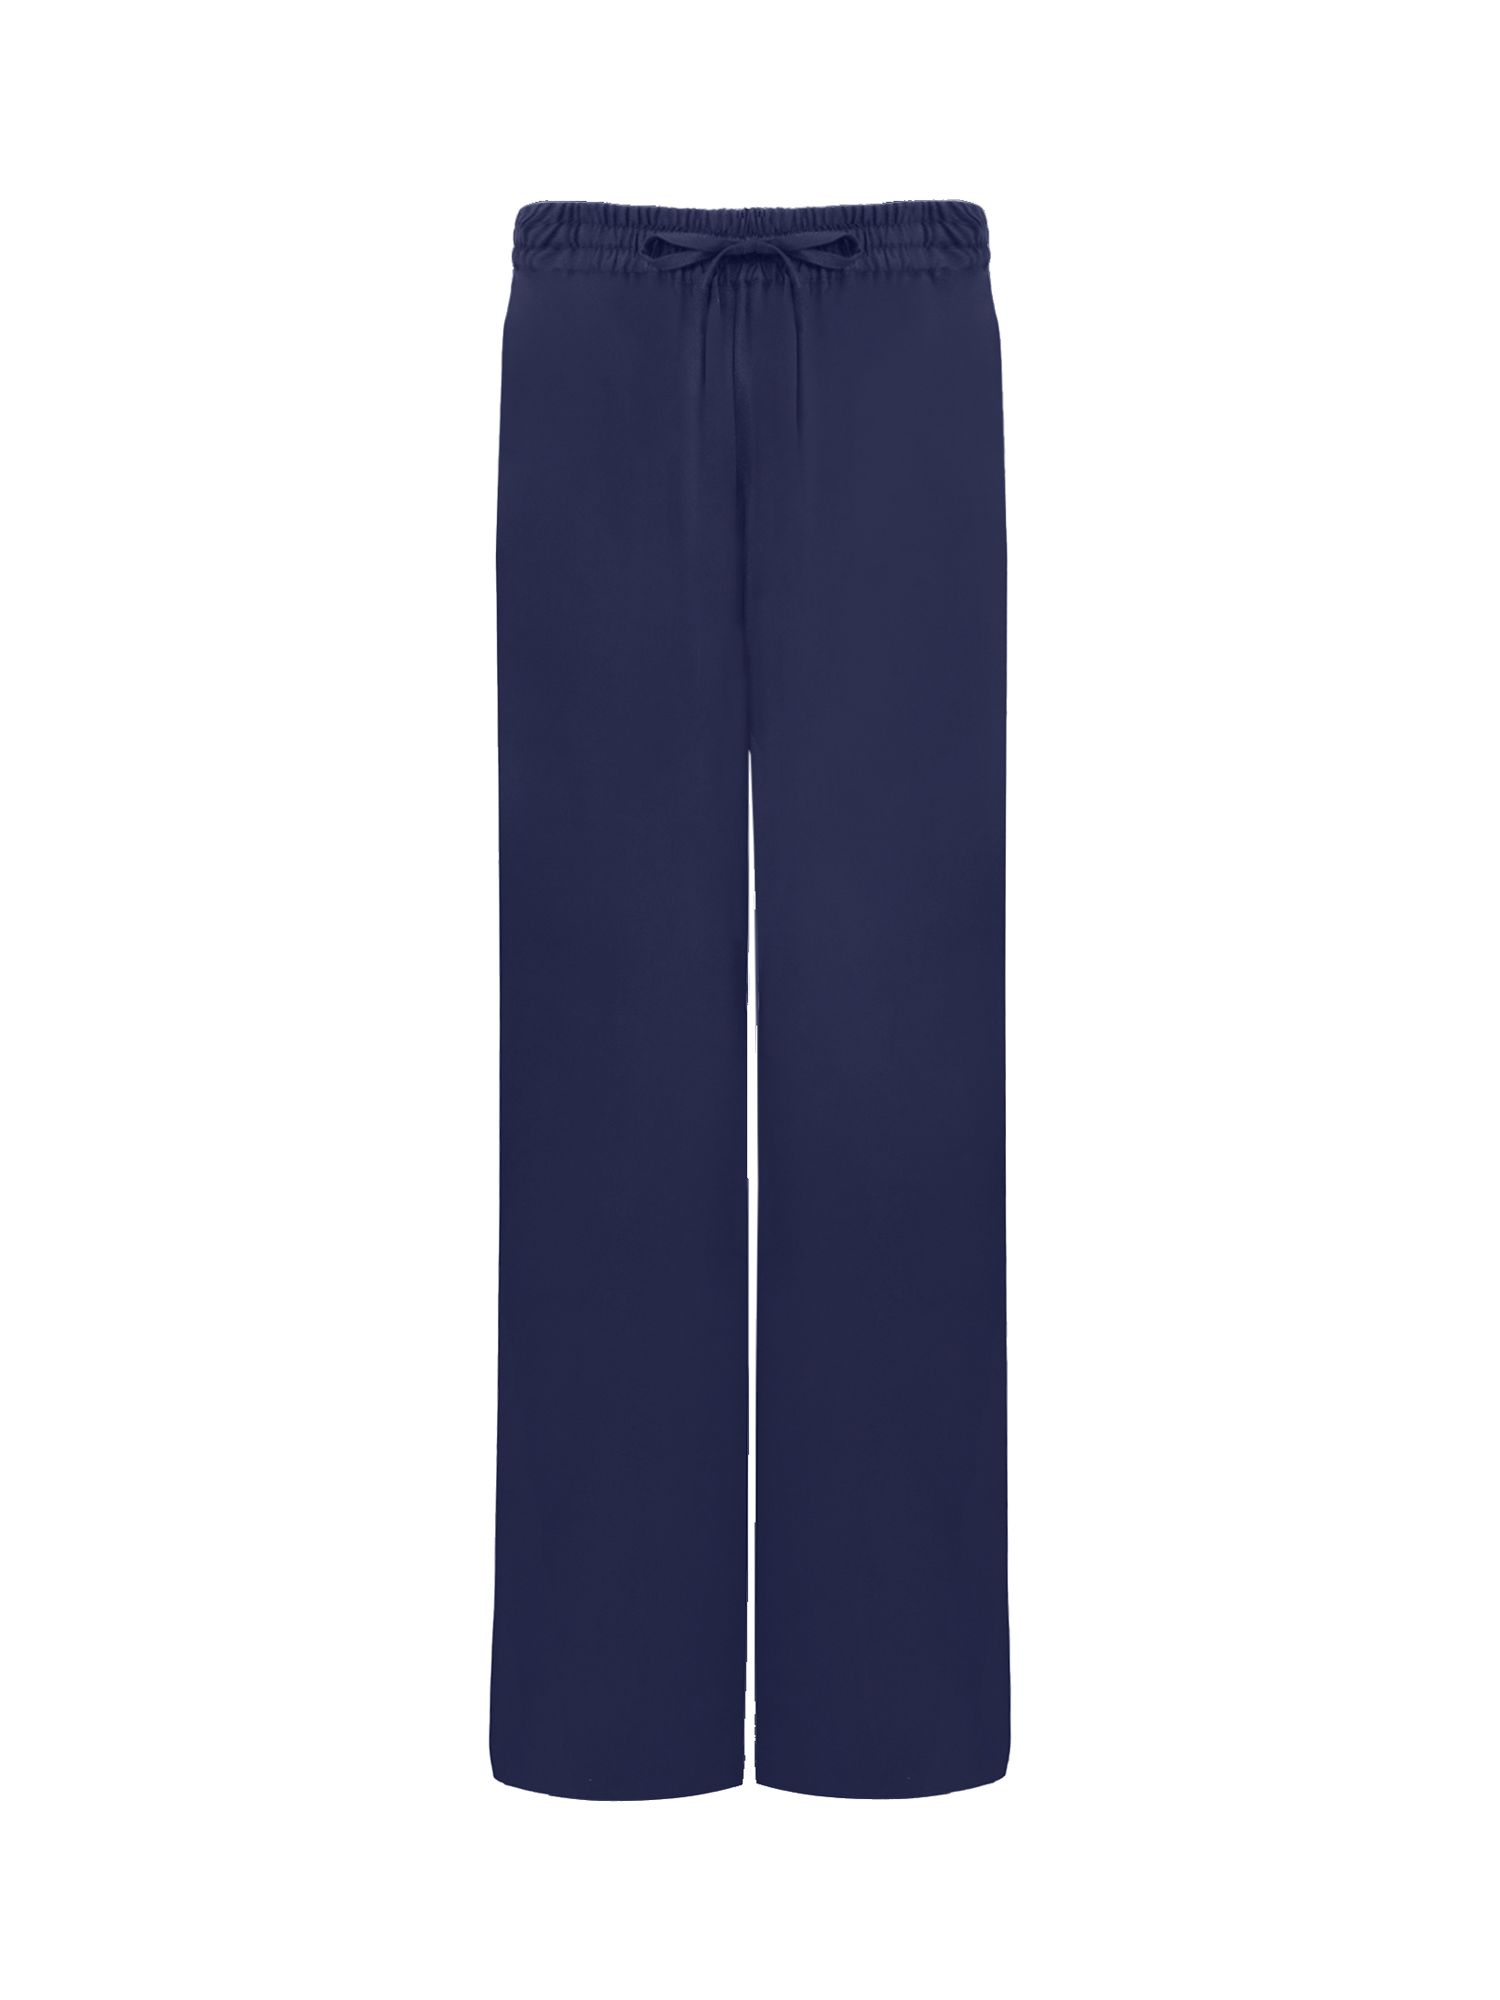 Ro&Zo Pull On Wide Leg Trousers, Navy at John Lewis & Partners